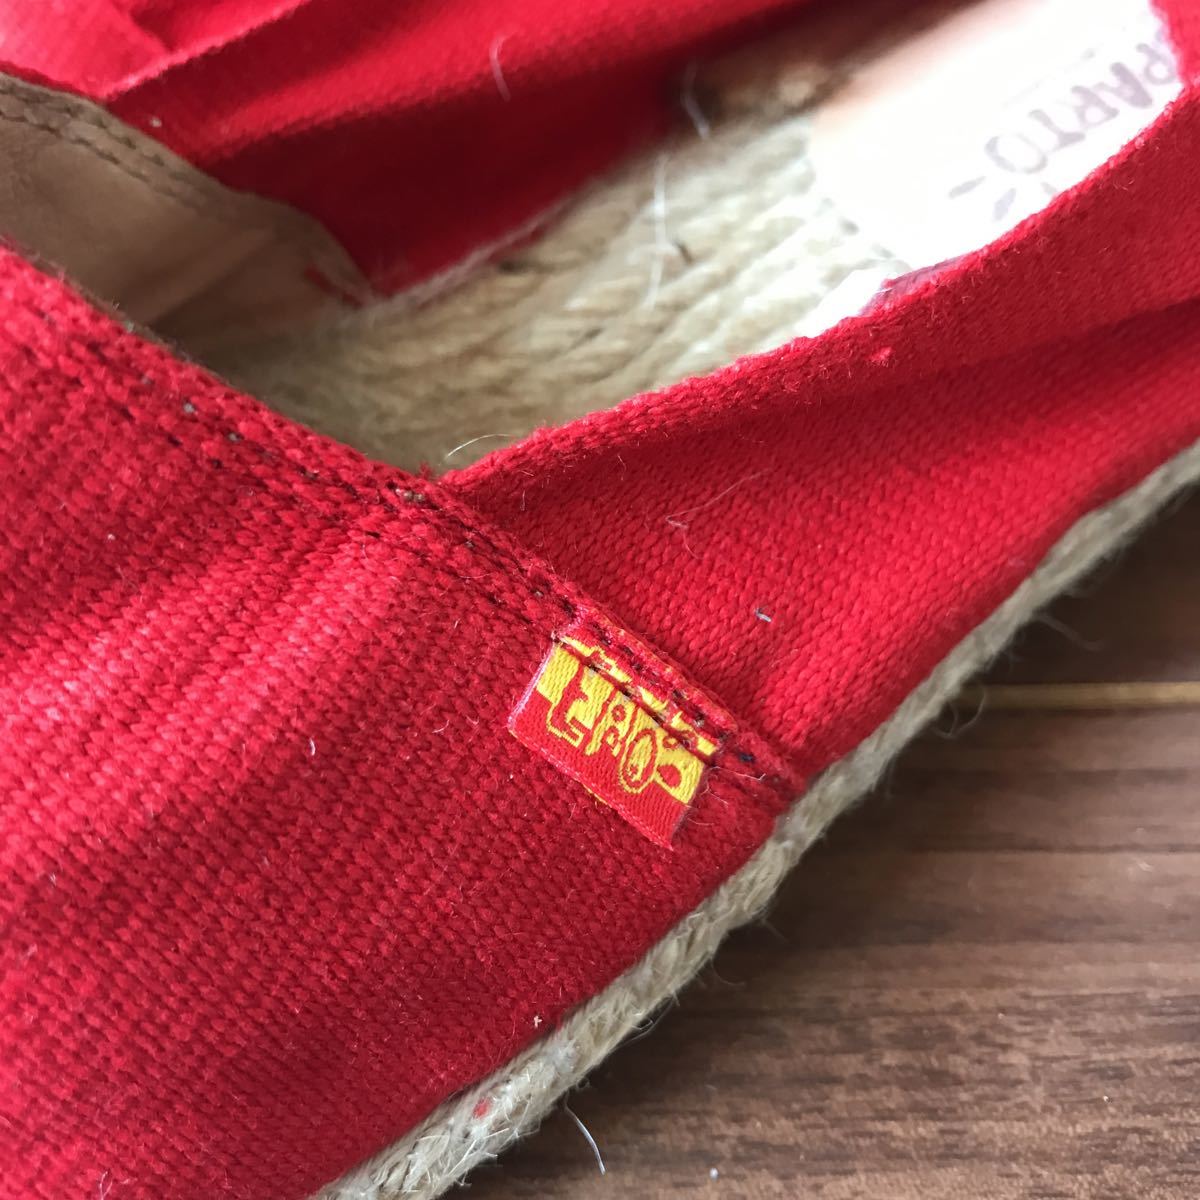 Espana deck shoes 26.0 red red suit Company 